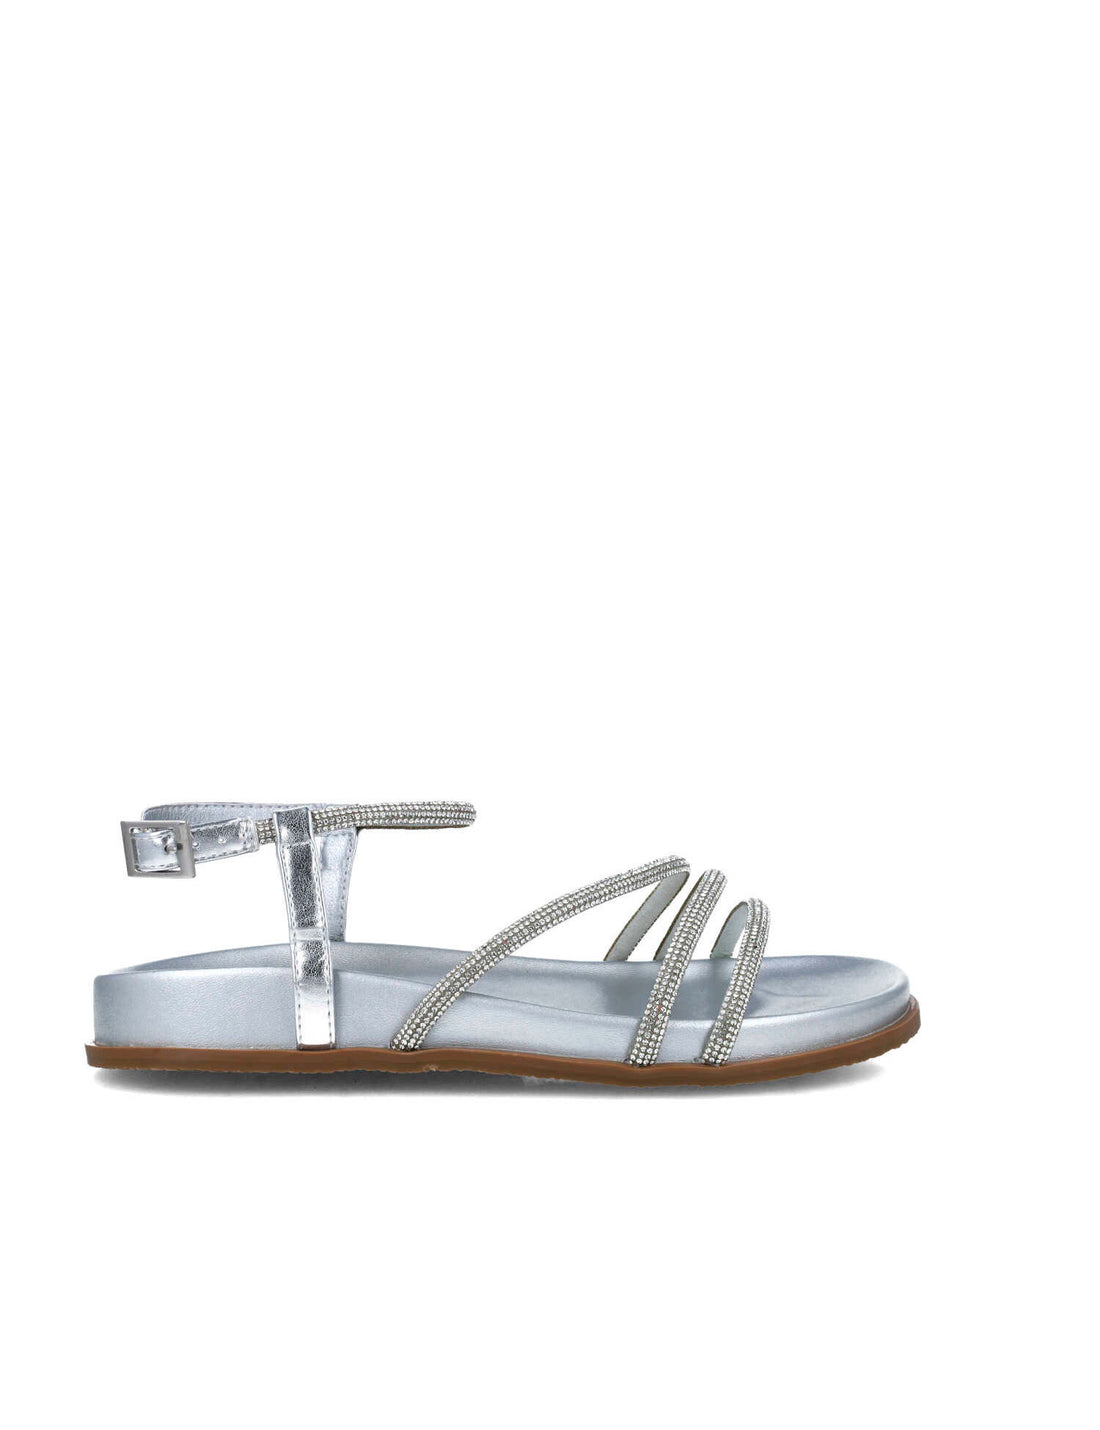 Silver Flat Sandals With Embellished Ankle Strap_24876_09_01